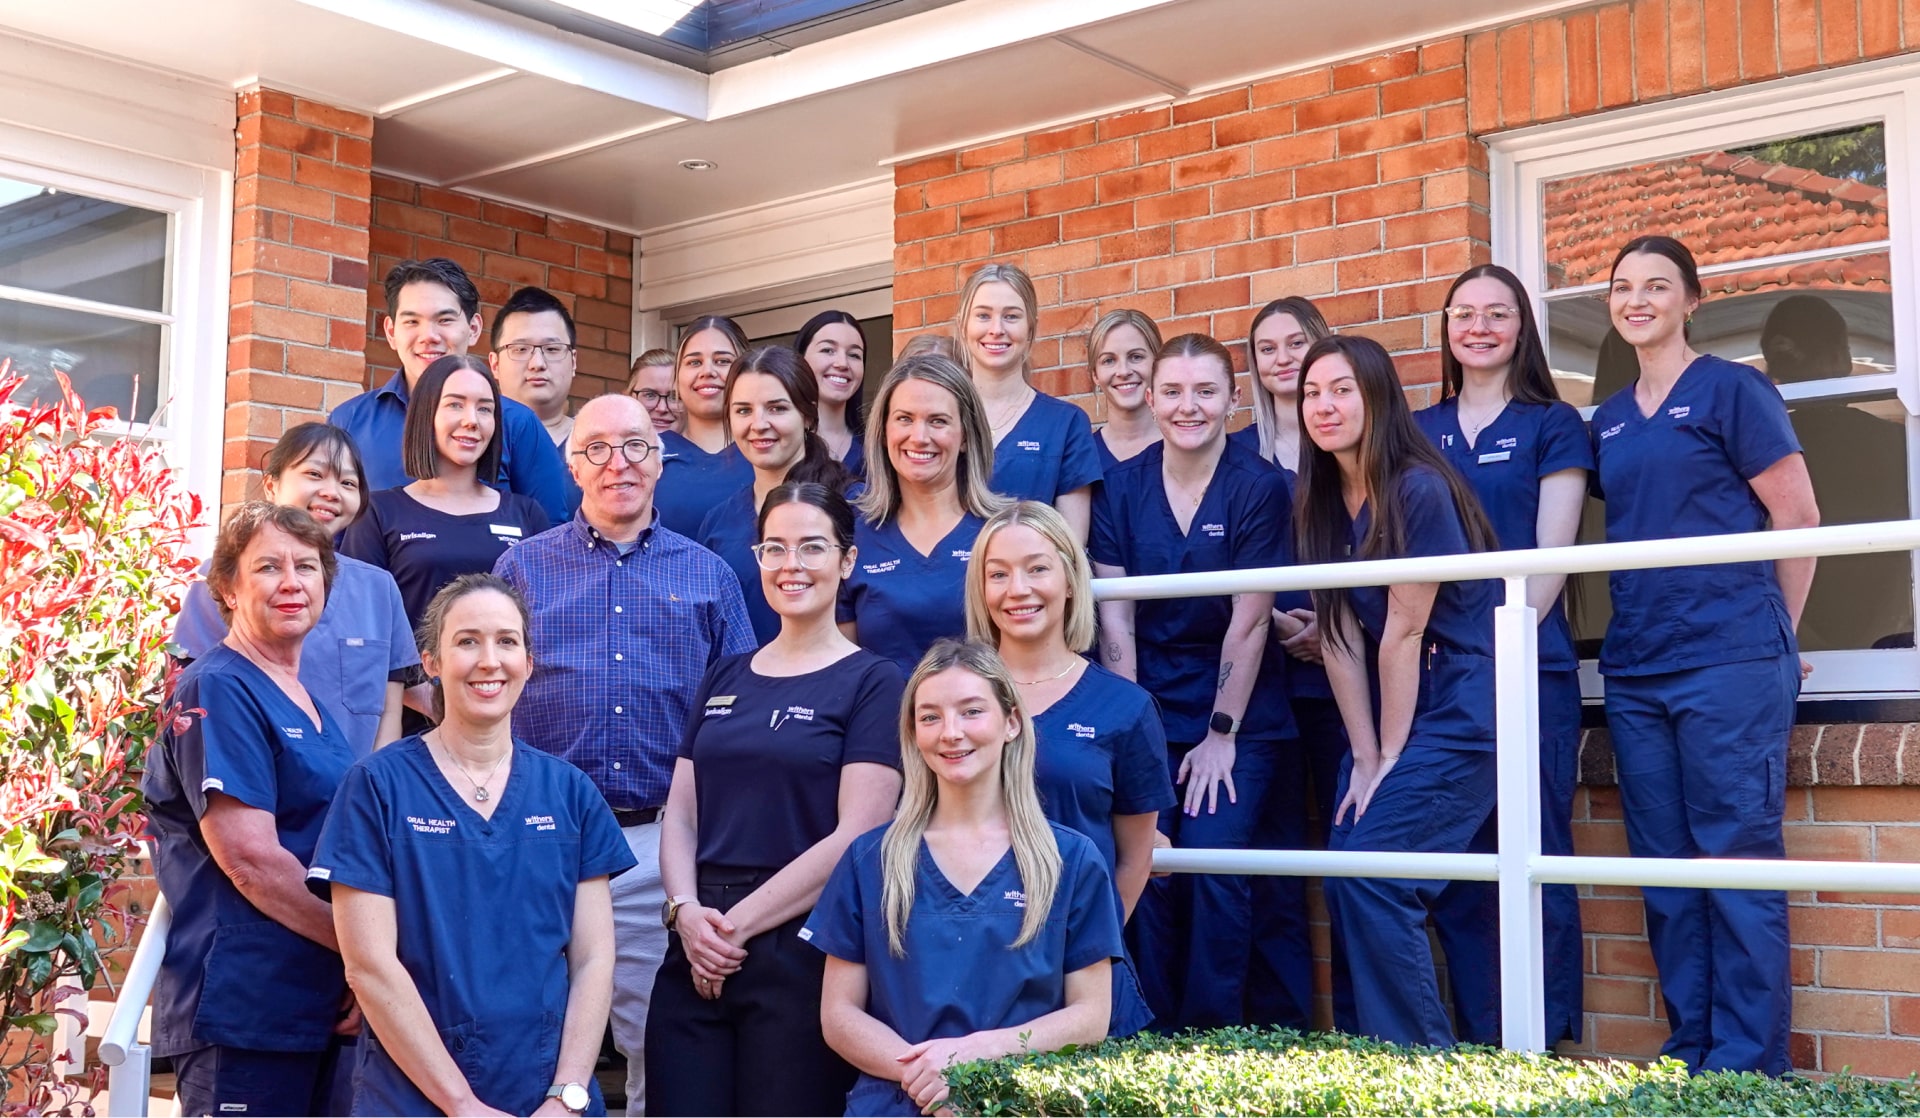 The Withers Dental team